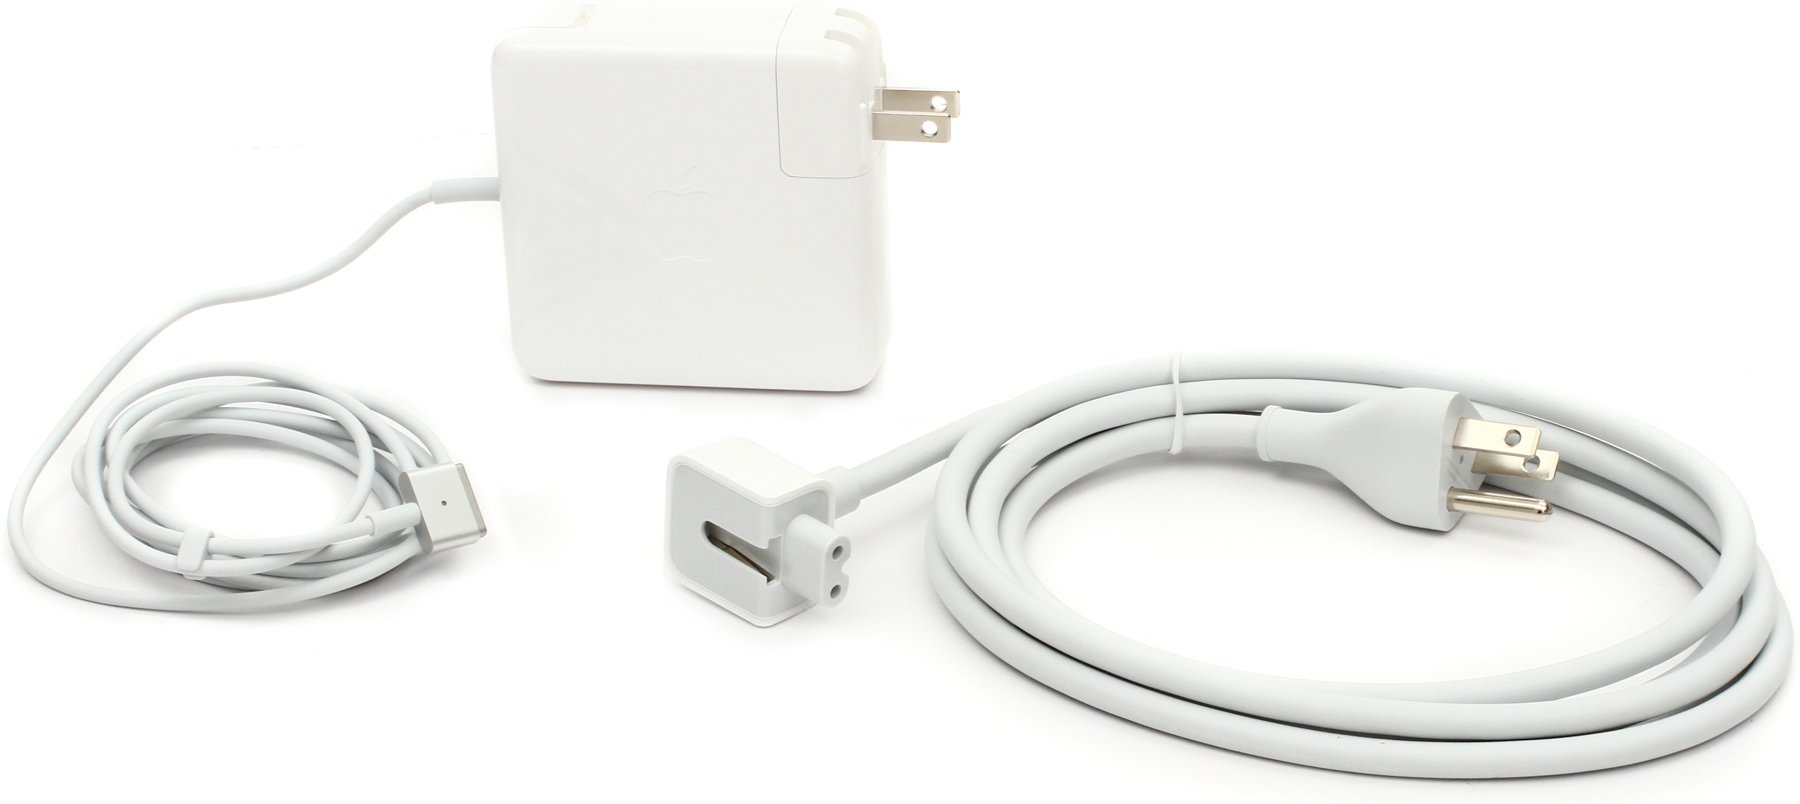 85 W MacBook charger